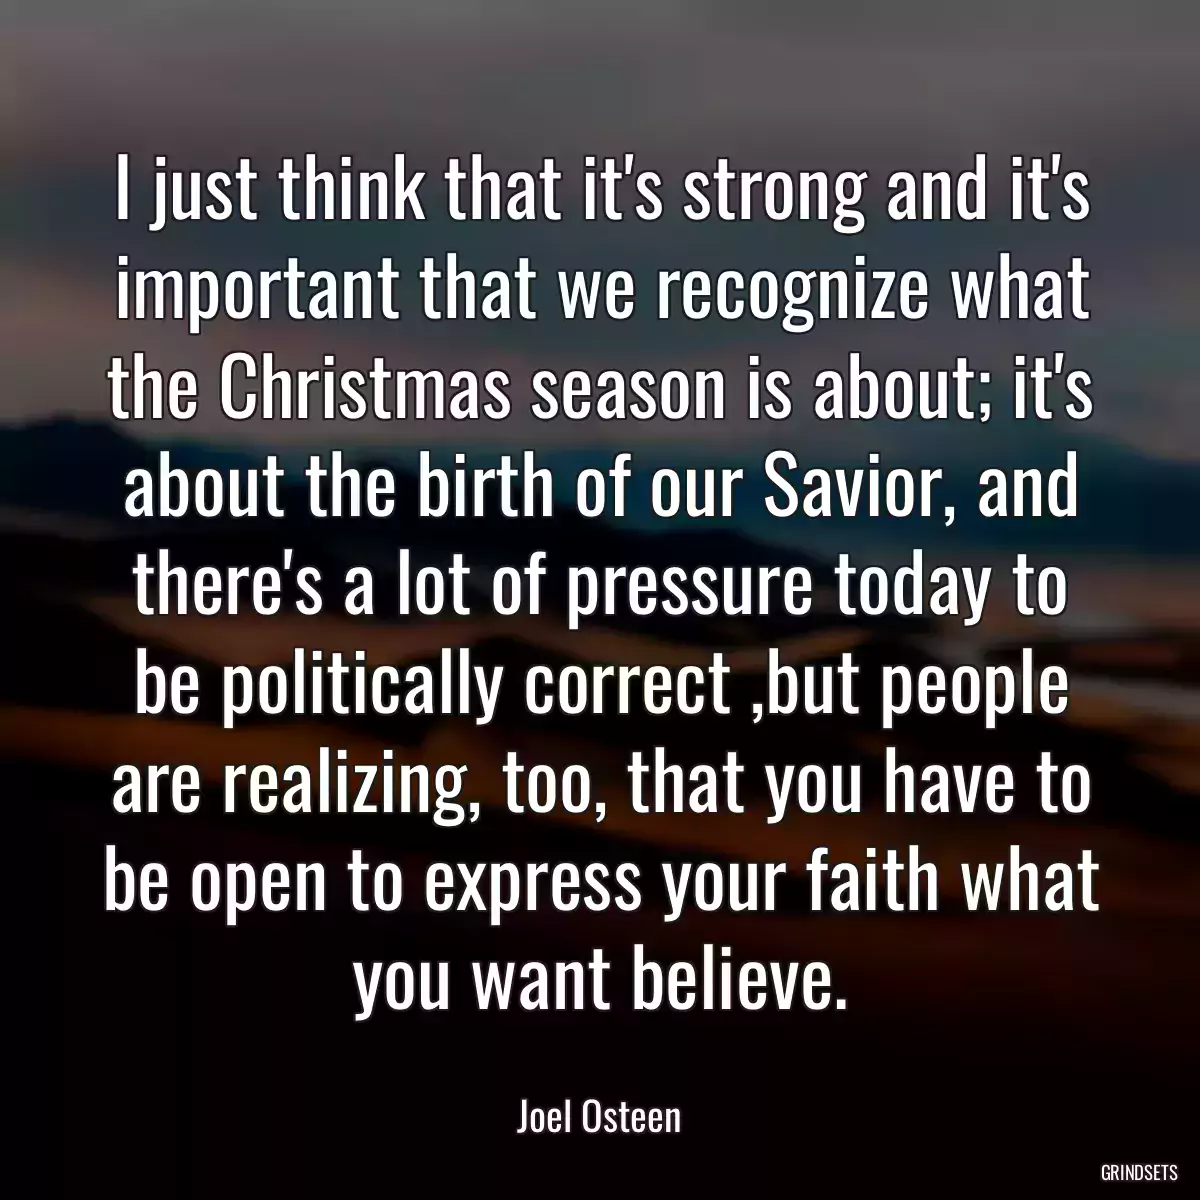 I just think that it\'s strong and it\'s important that we recognize what the Christmas season is about; it\'s about the birth of our Savior, and there\'s a lot of pressure today to be politically correct ,but people are realizing, too, that you have to be open to express your faith what you want believe.